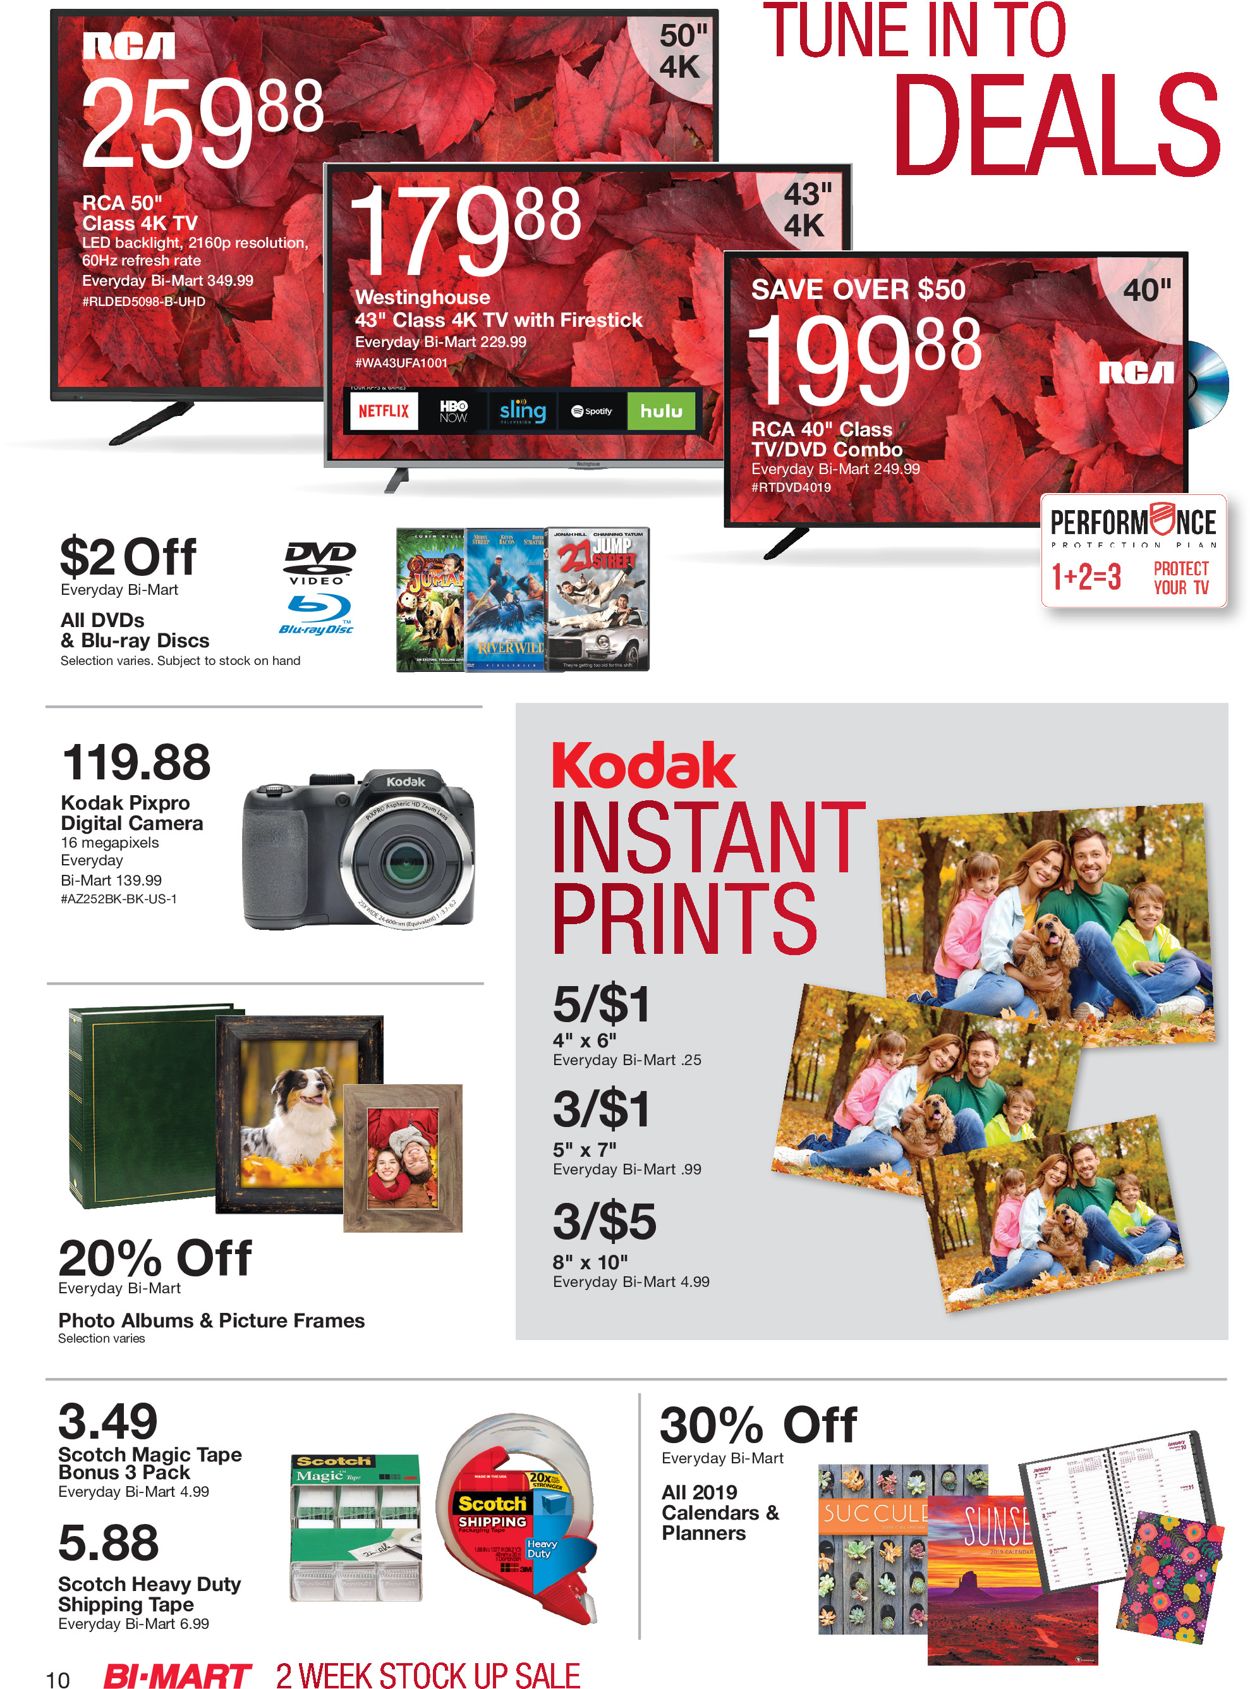 Bi-Mart Ad from 11/14/2019